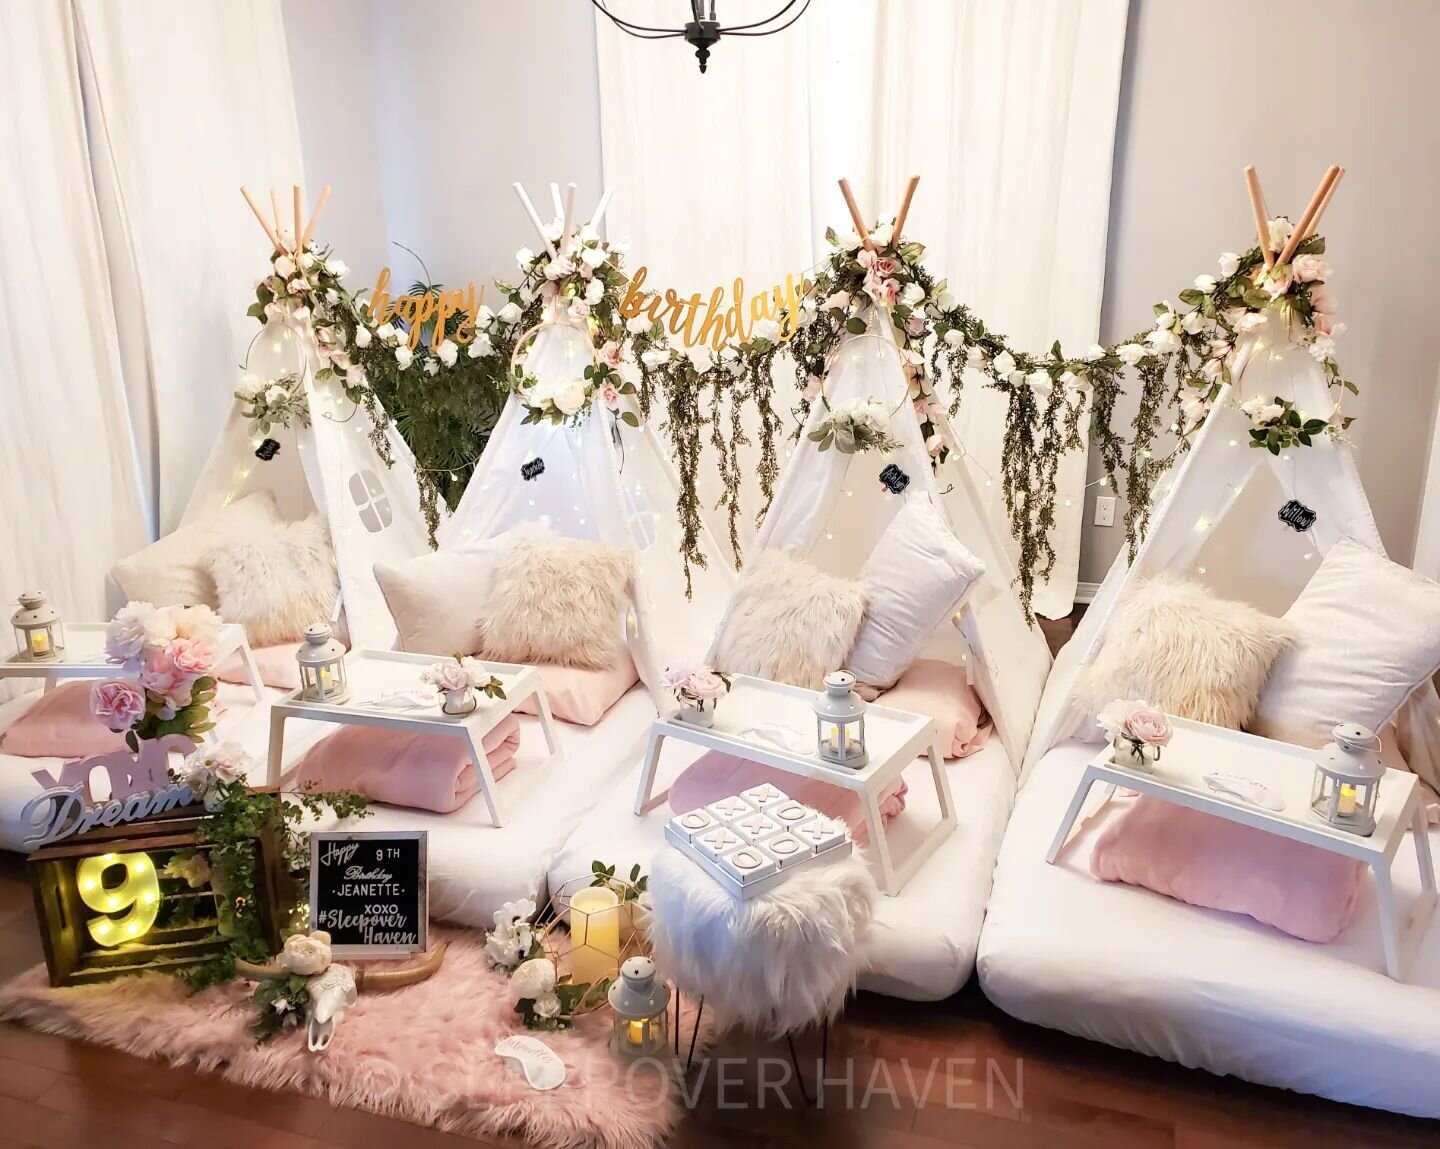 HAPPY BIRTHDAY JEANETTE!
We hope she had an amazing Sleepover! ♡ 

This is our Boho Chic with a Touch of Pink theme in our Premium Package. ♡
If you'd like to book a Sleepover just like this please visit Sleepoverhaven.com 🙂
.
.
.
.
.
.
.
.
.

#slee